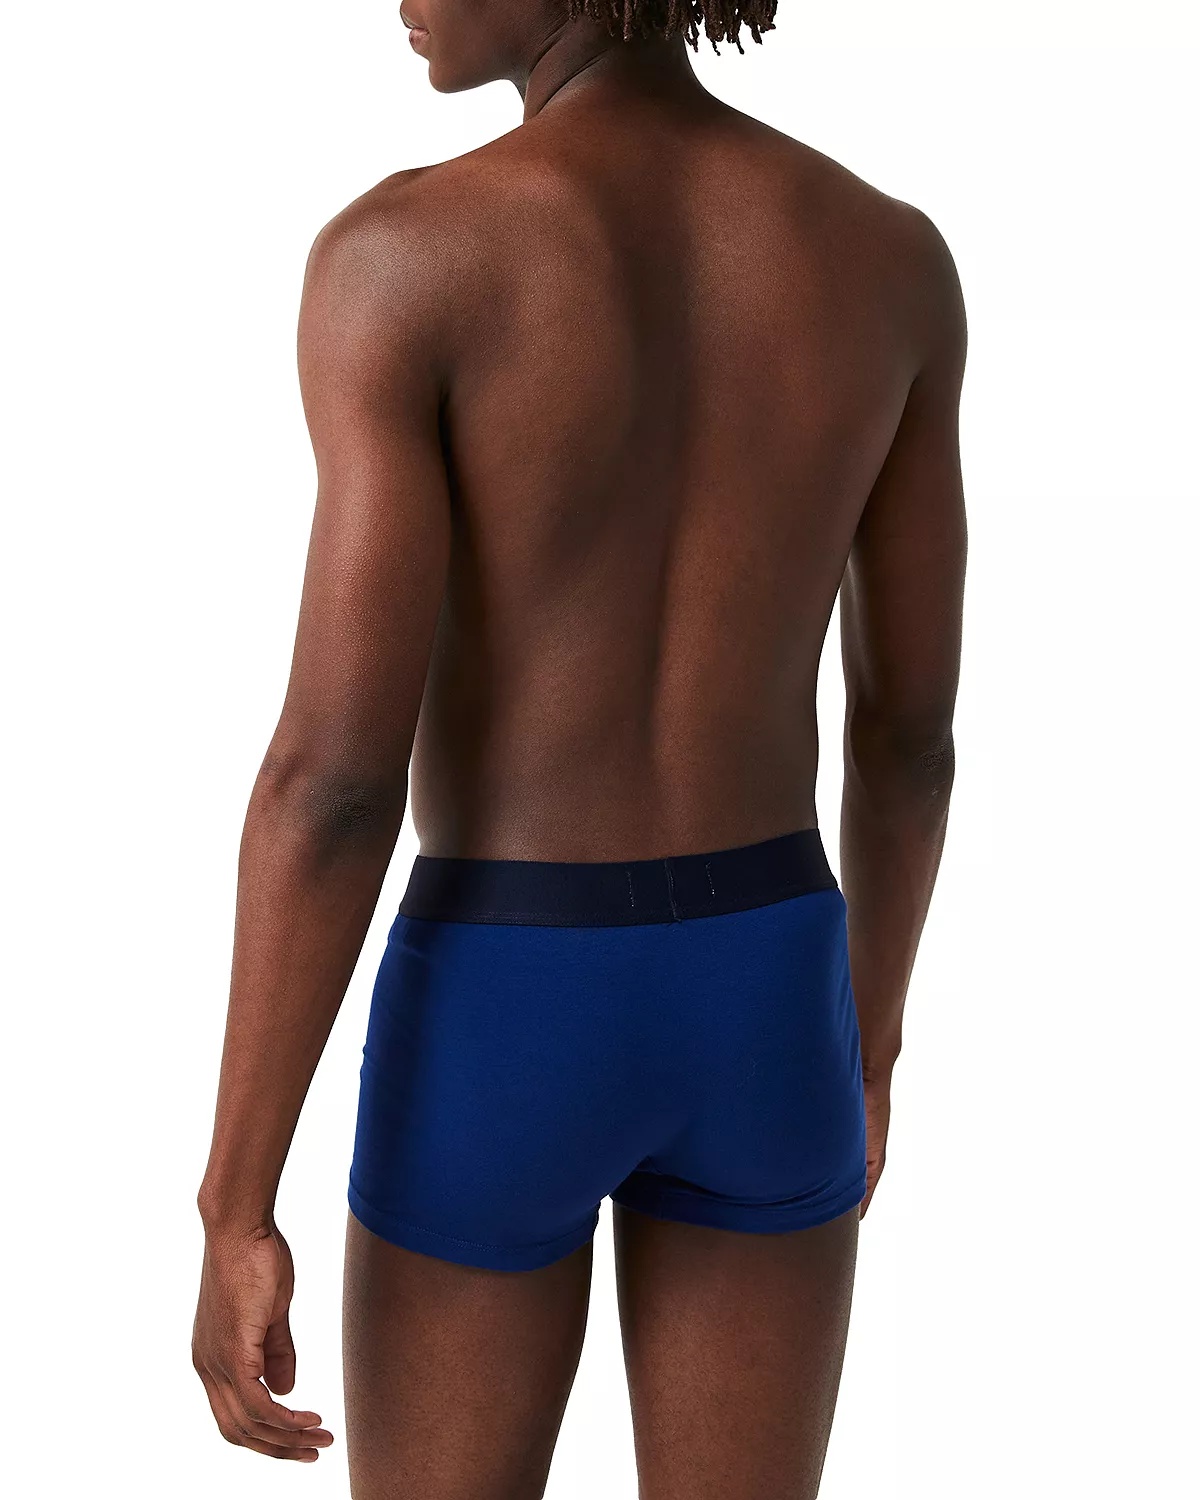 Cotton Stretch Trunks, Pack of 3 - 4